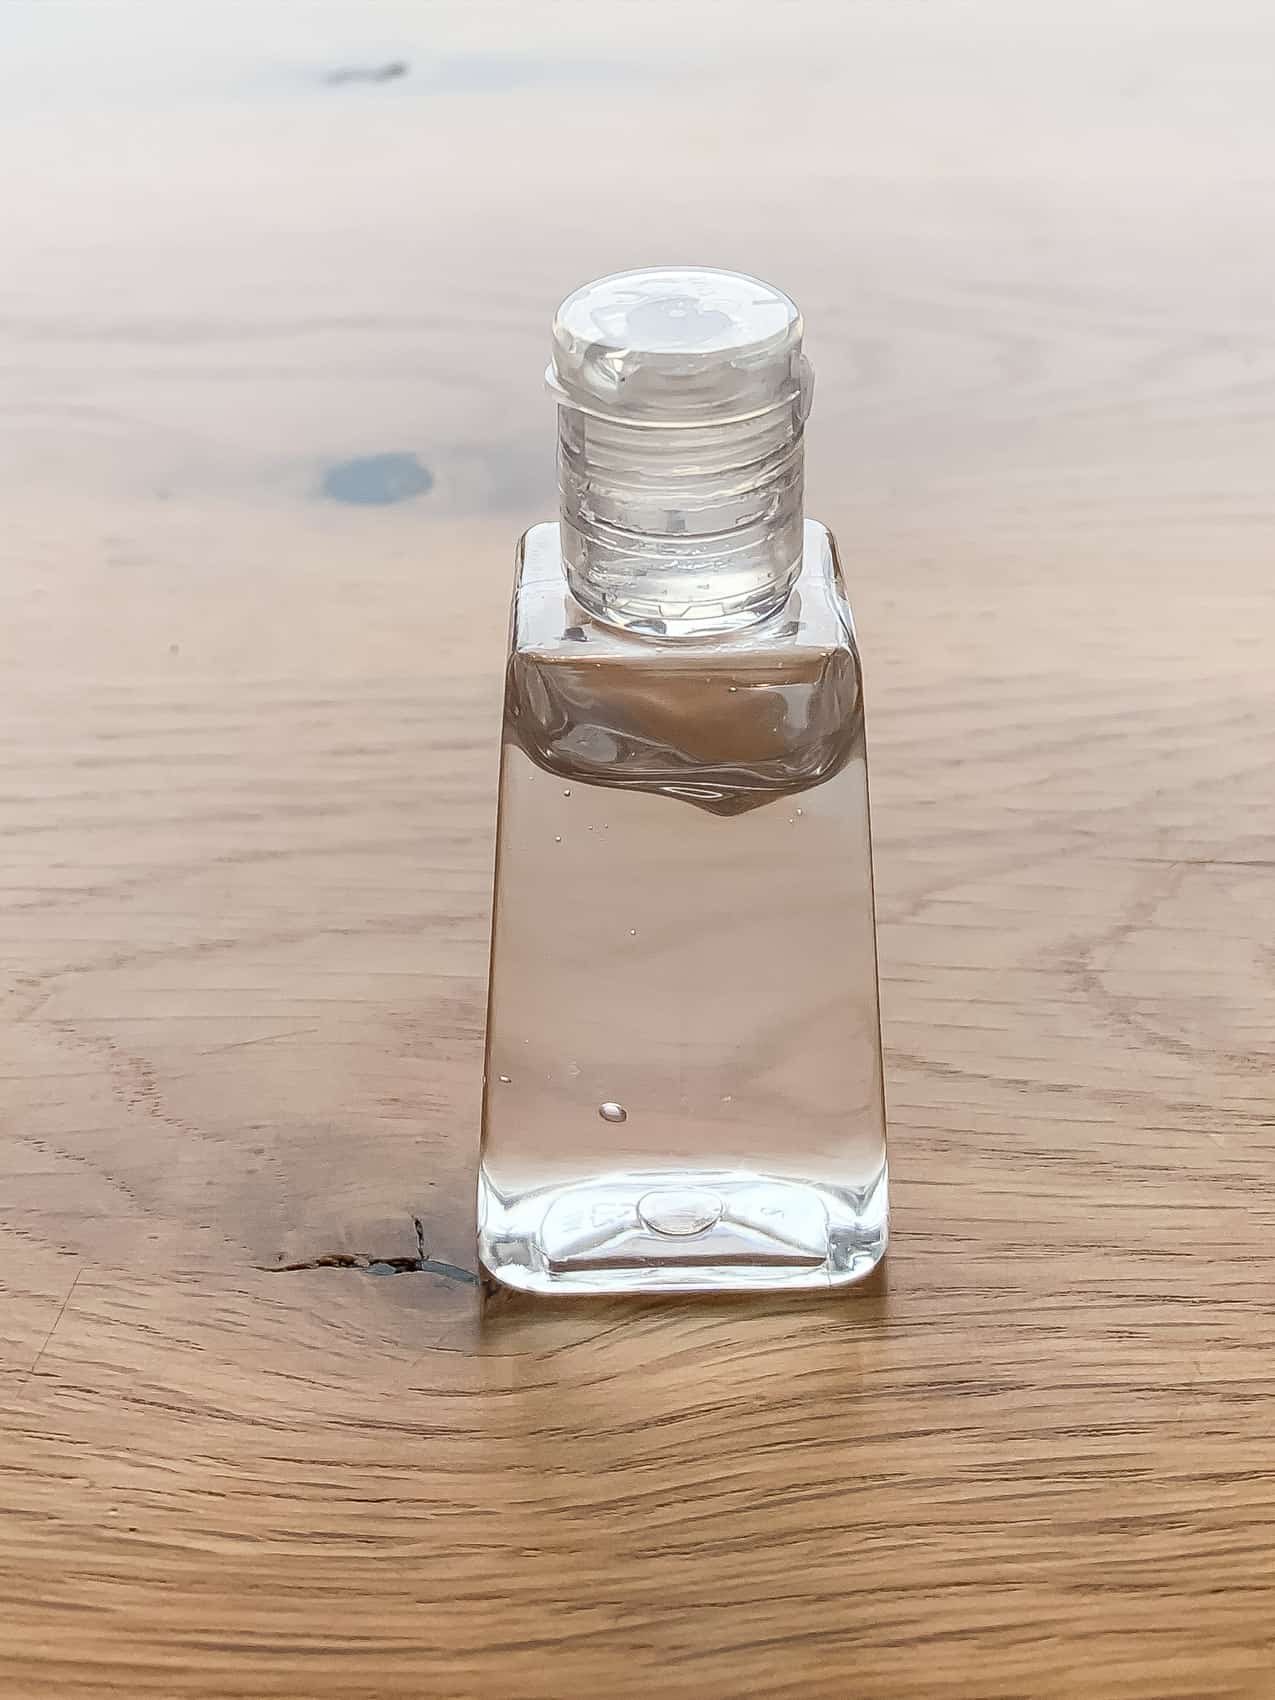 homemade hand sanitizer on wood table